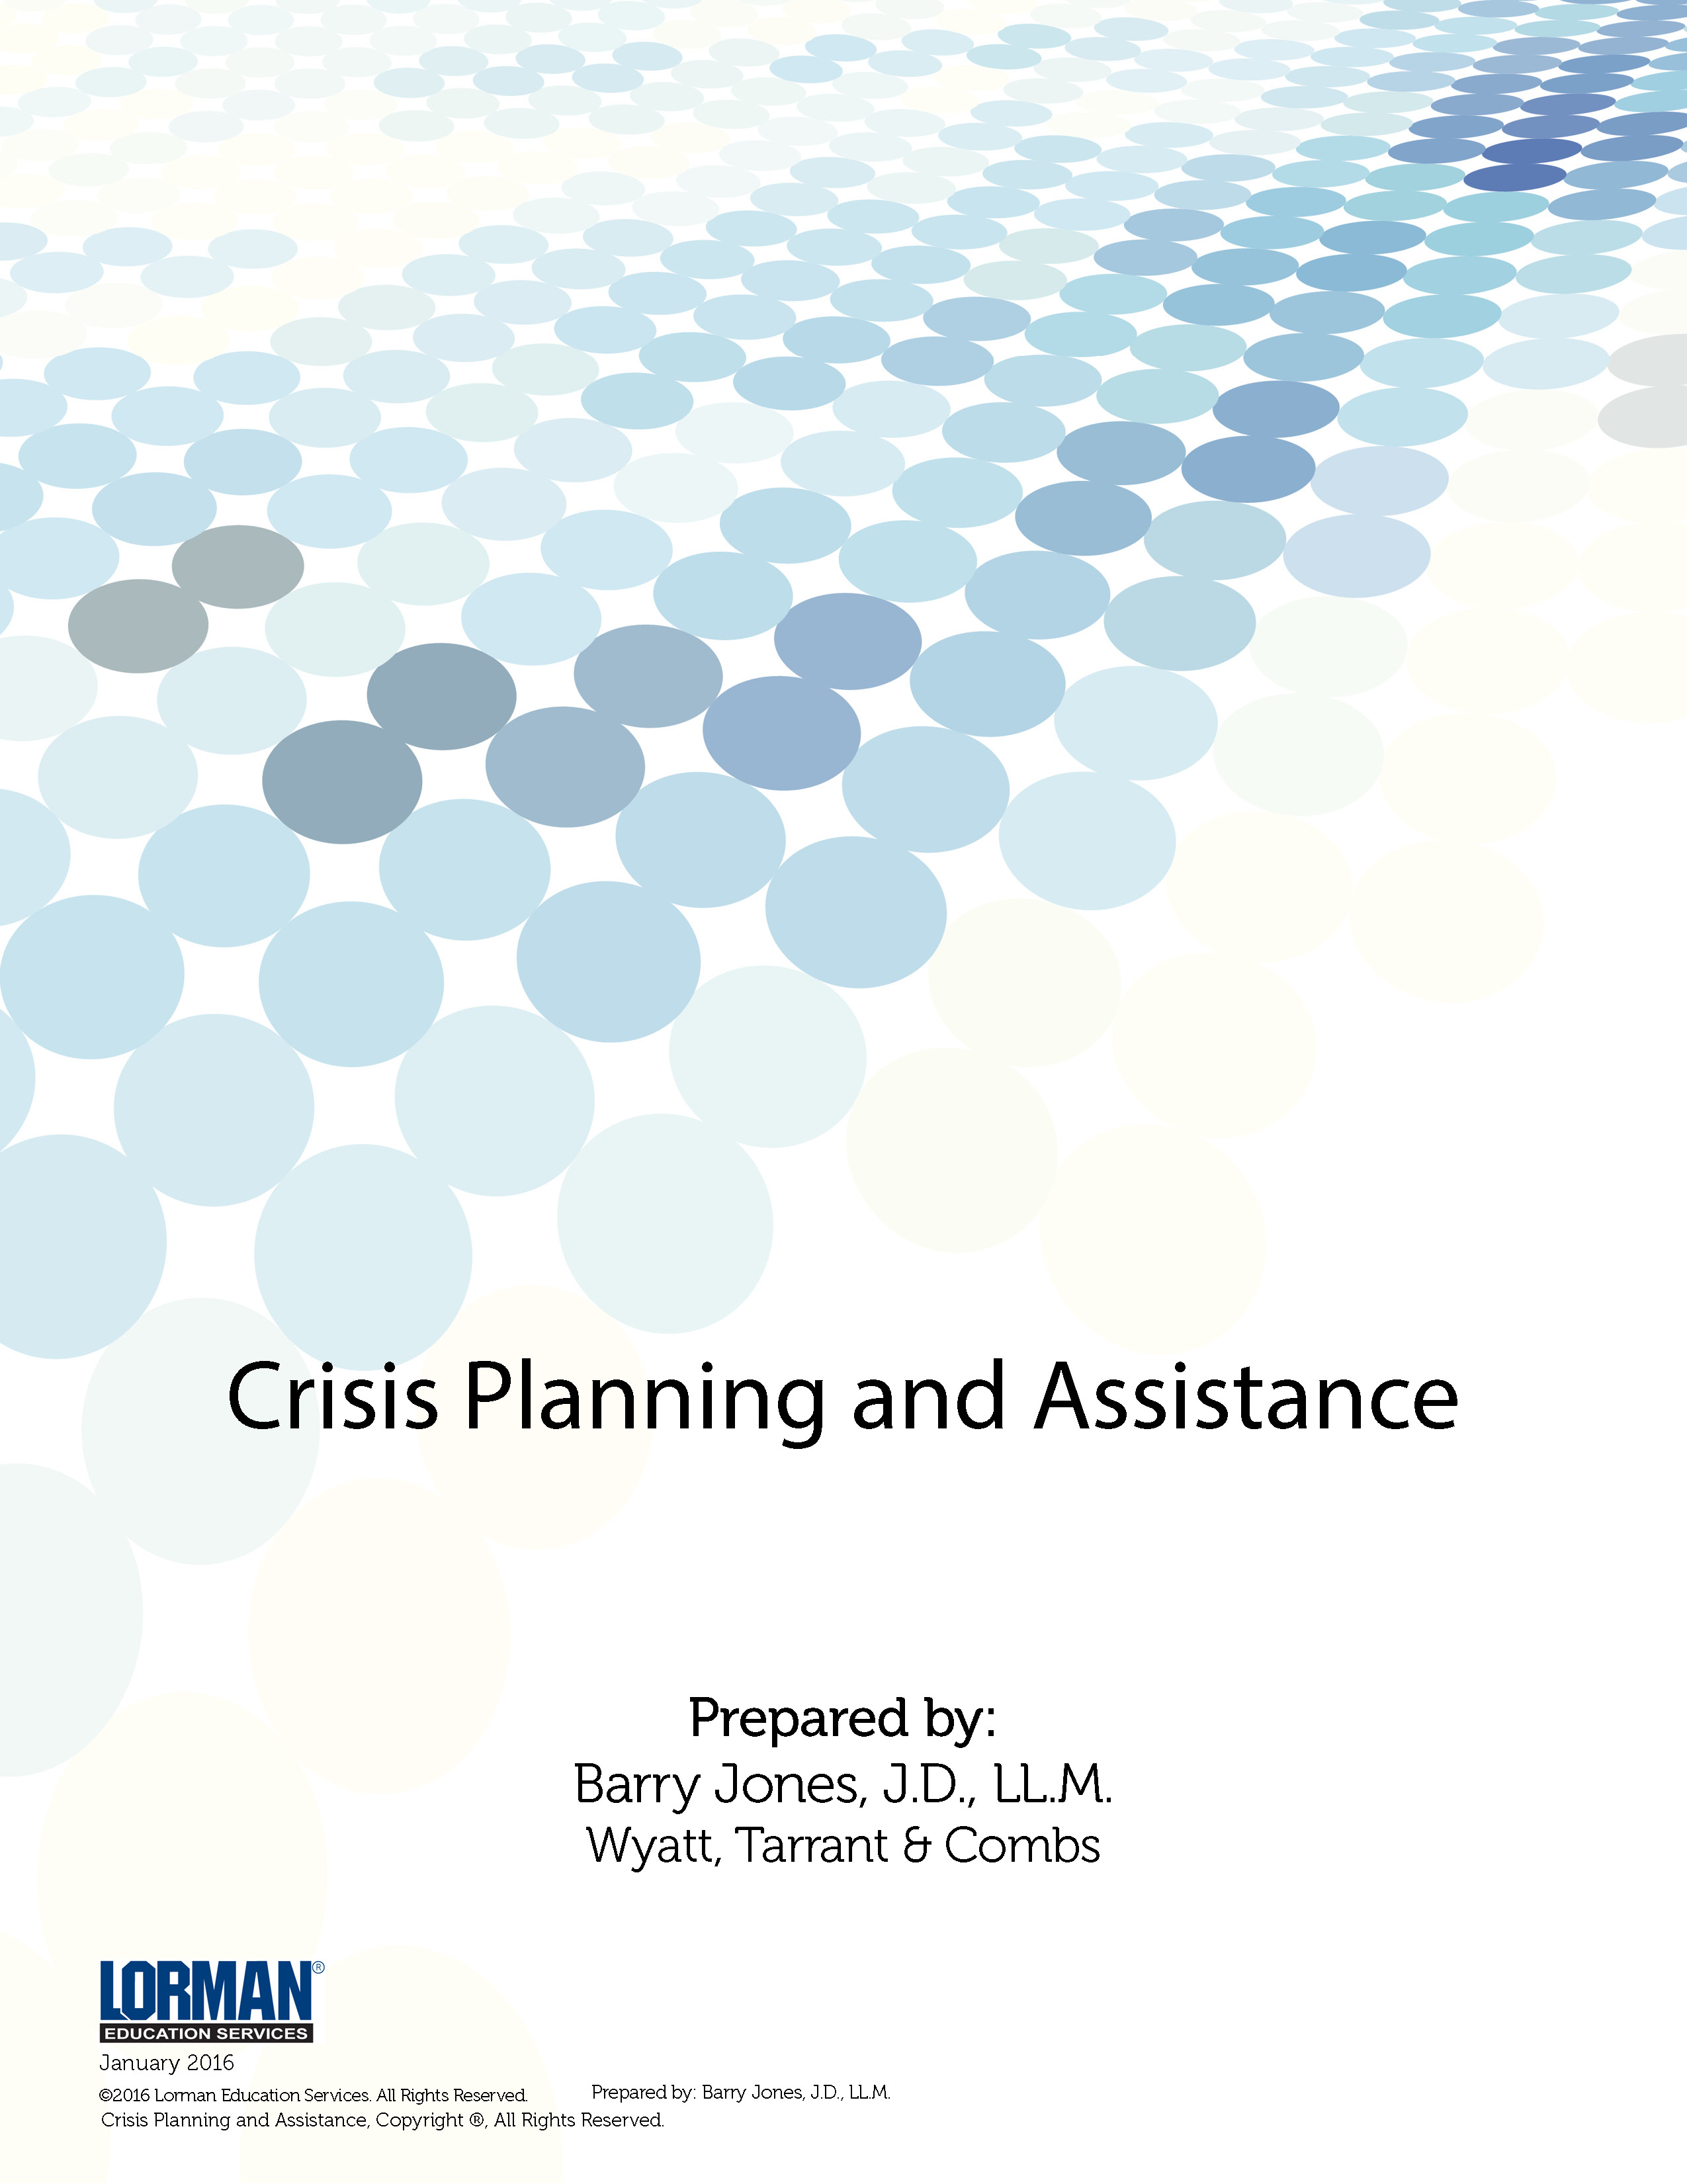 Crisis Planning and Assistance